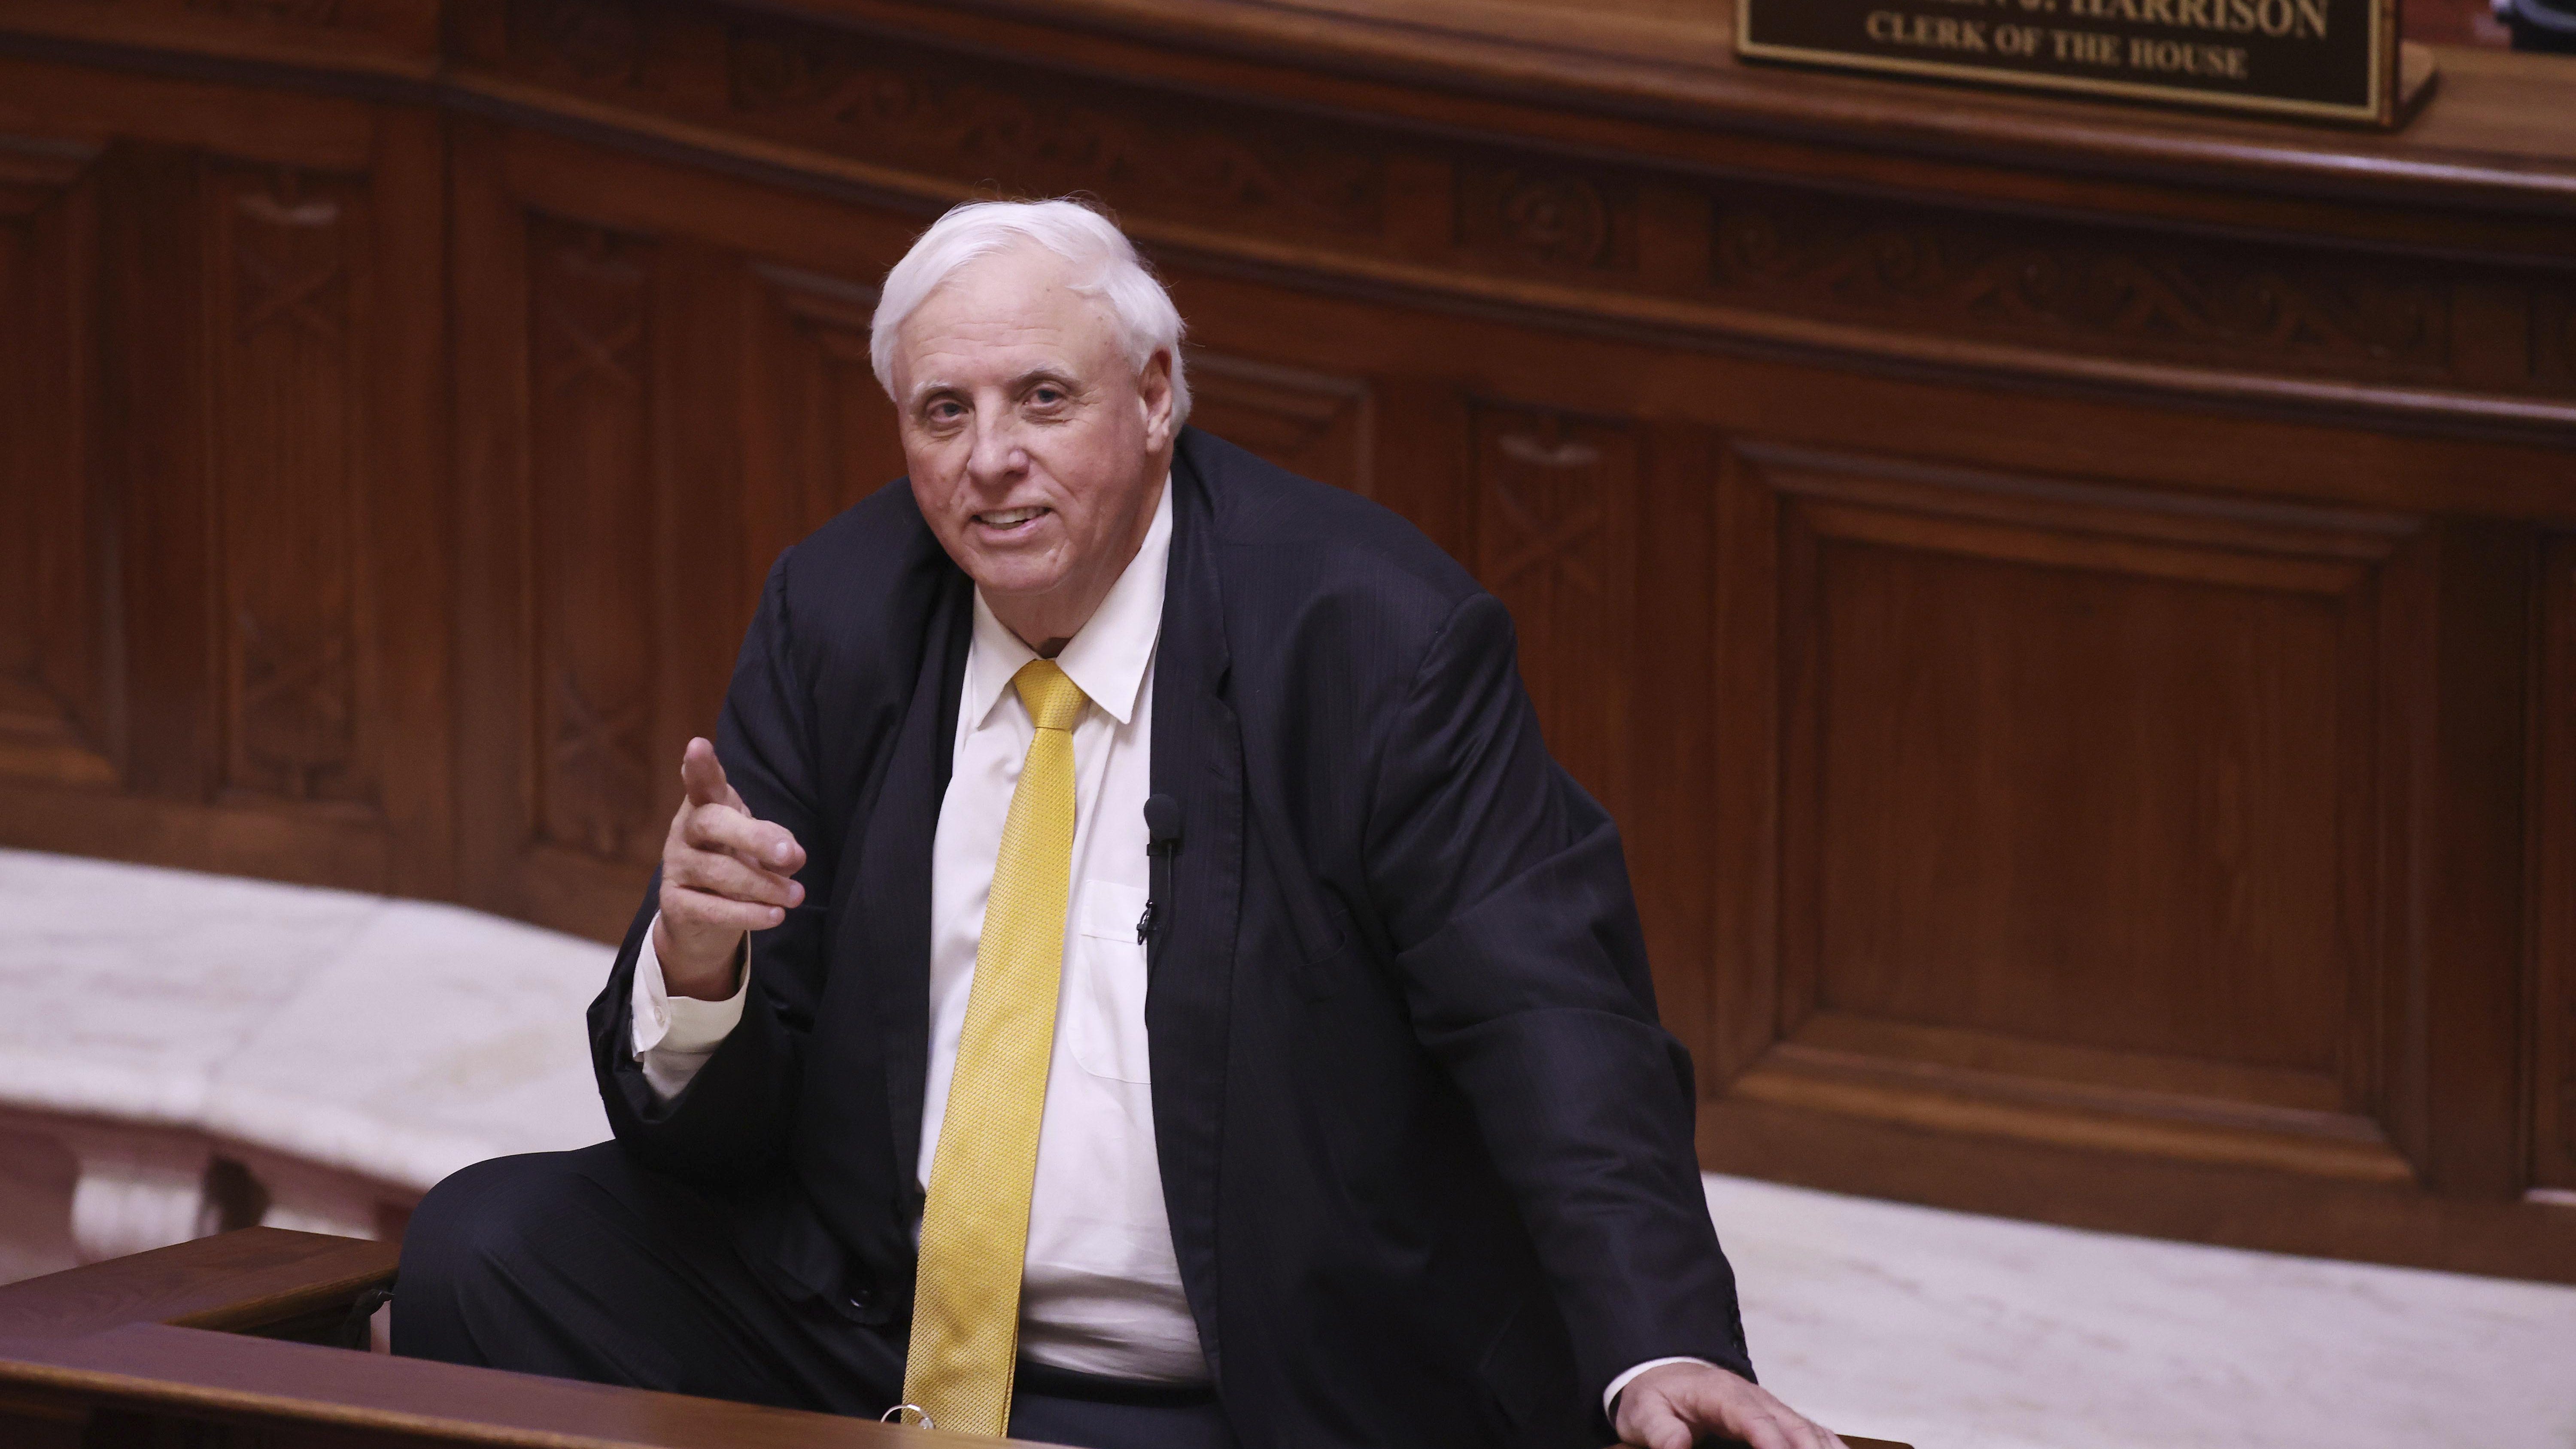 West Virginia Gov. Jim Justice delivers his State of the State address in the House Chambers of the West Virginia State Capitol Building in Charleston on Feb. 10.